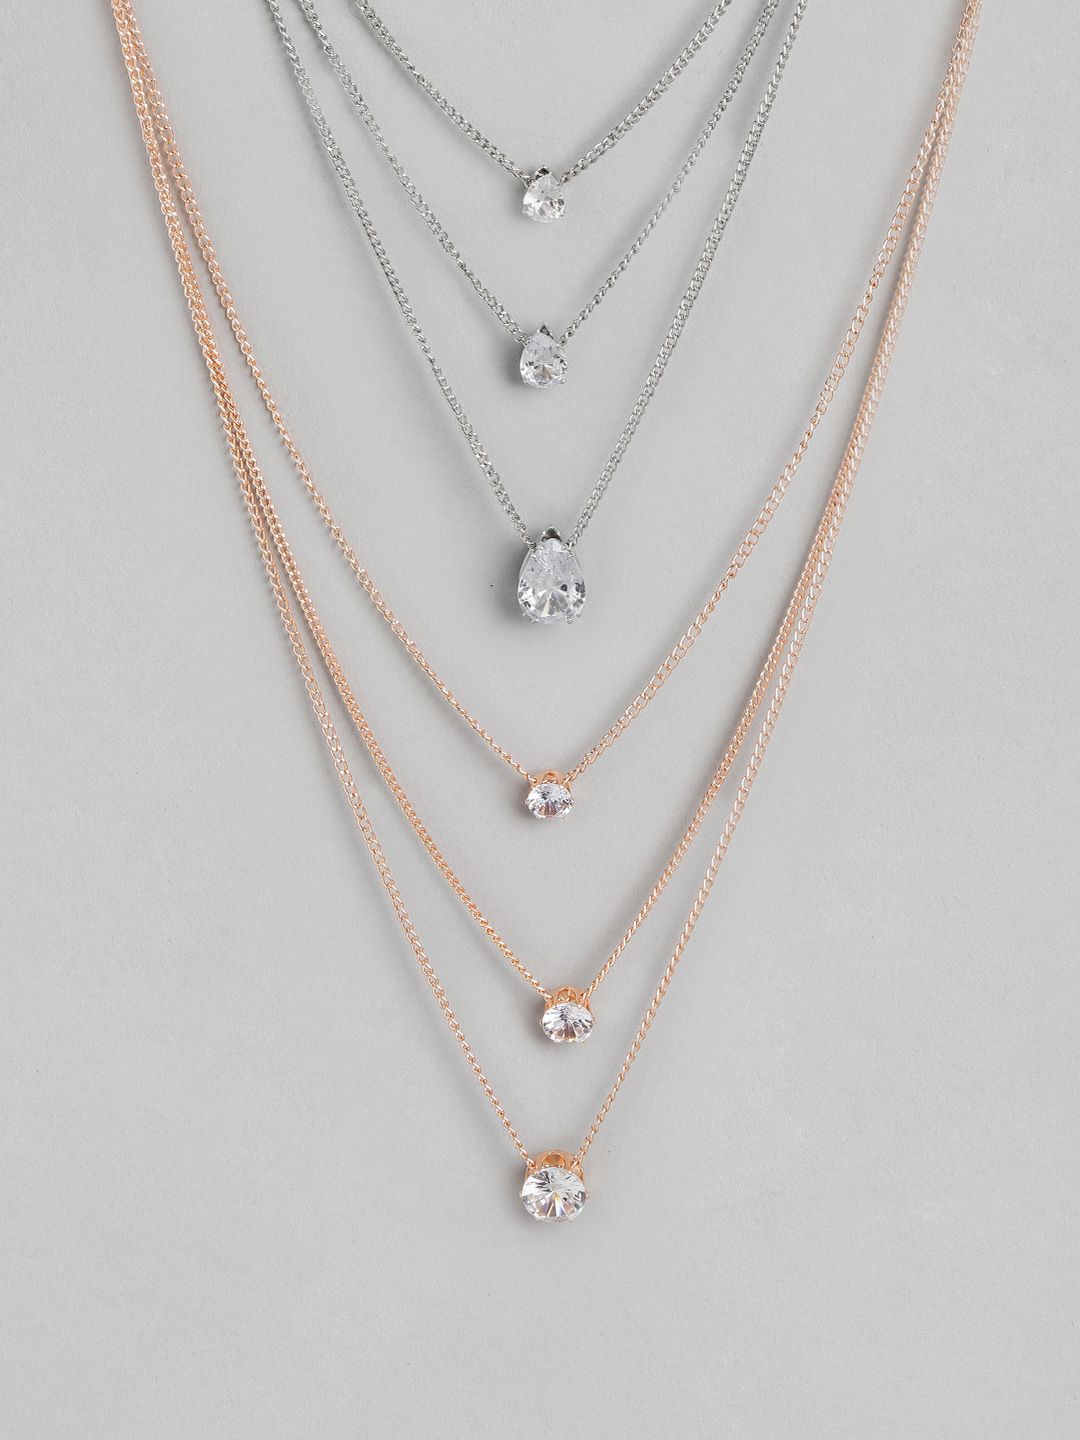 Kord Store Set of Silver-Toned & Rose Gold-Plated Layered Studded Necklaces Price in India